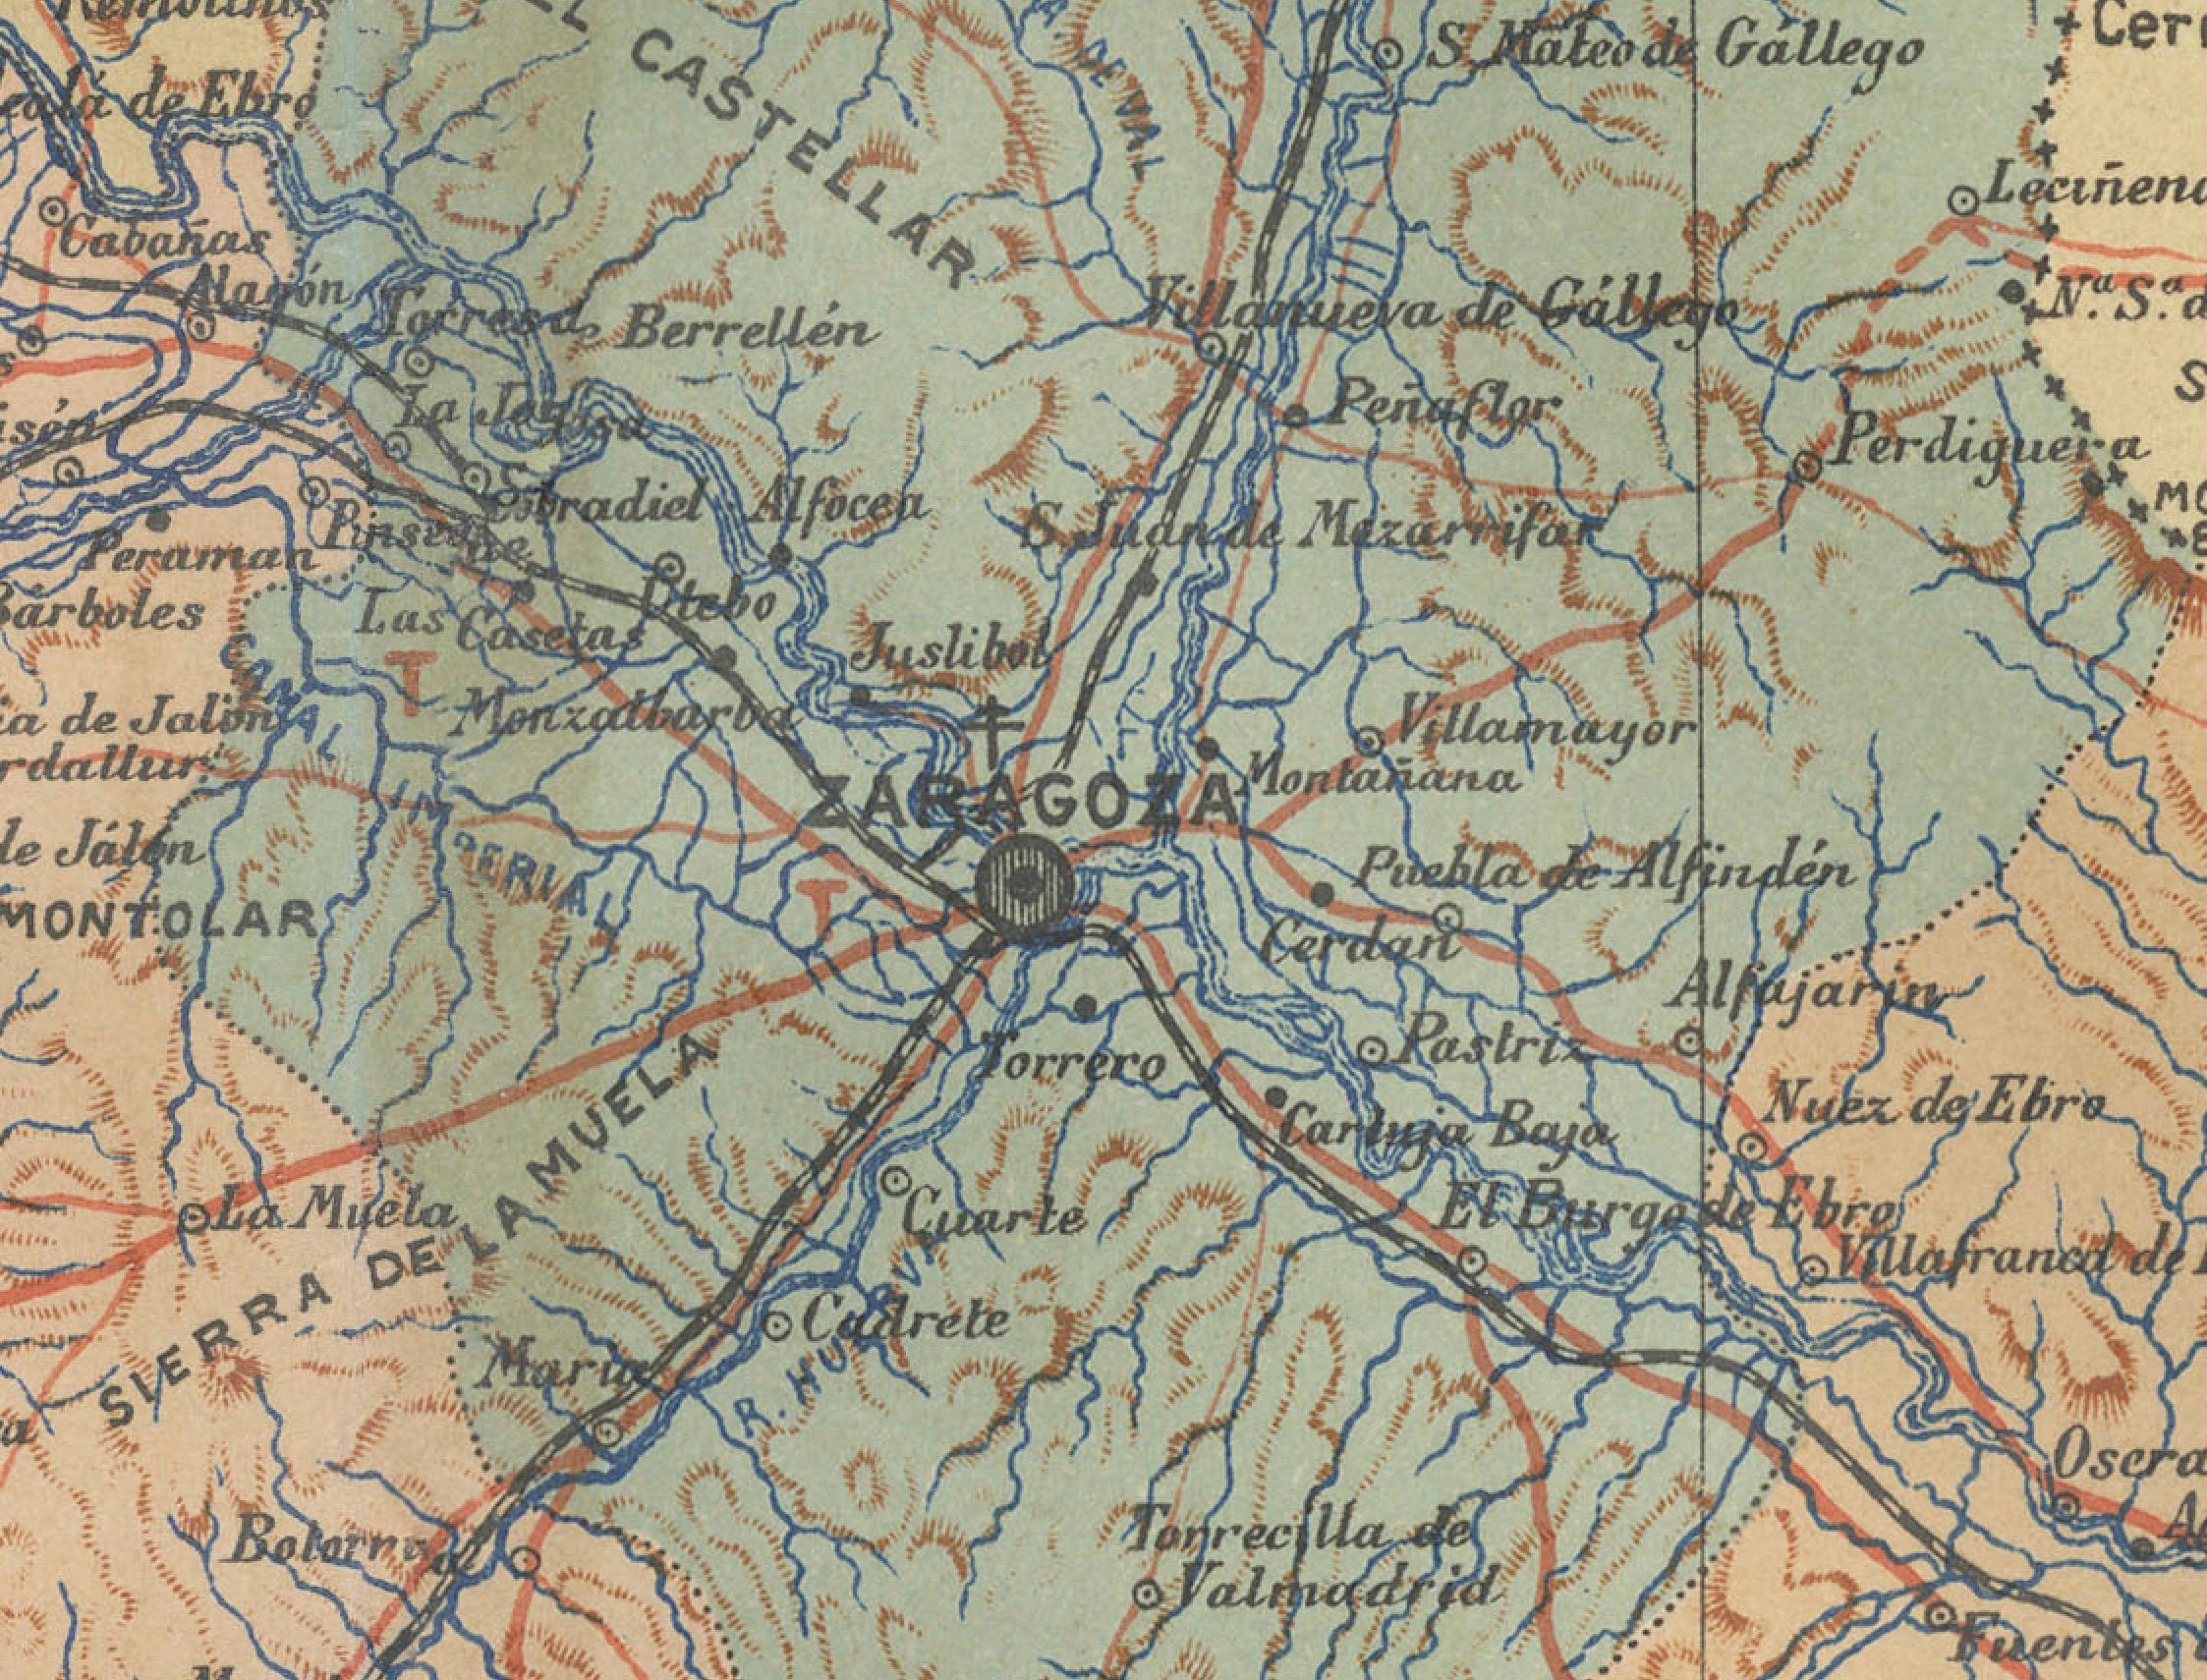 Early 20th Century Zaragoza: Crossroads of Heritage - The 1901 Cartographic Chronicle For Sale